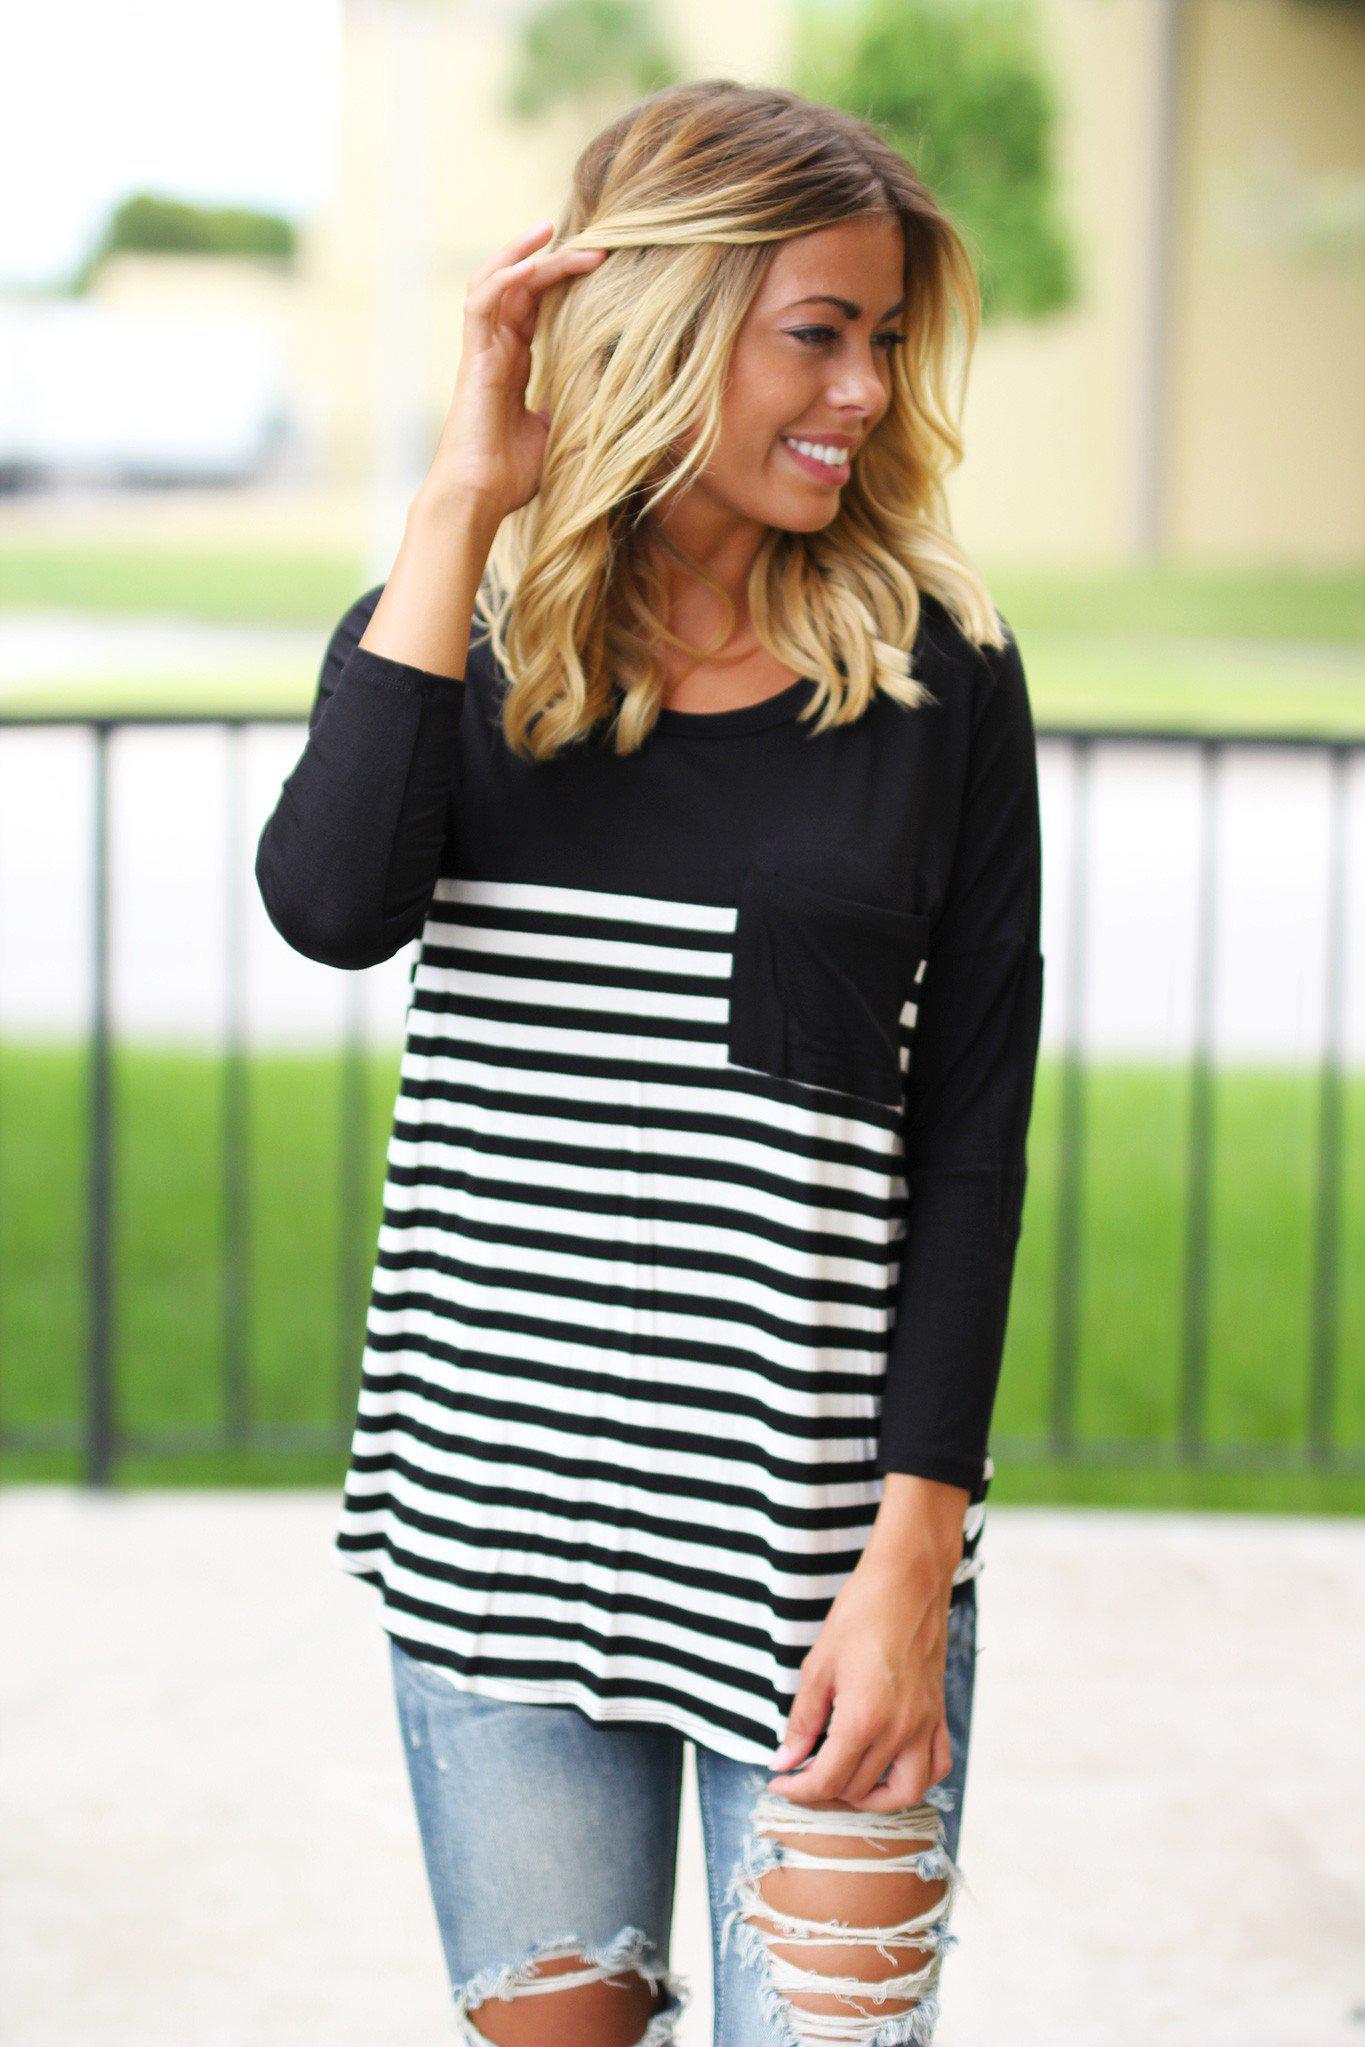 Black Striped Top | Black Top with Stripes | Black Top With Pocket ...